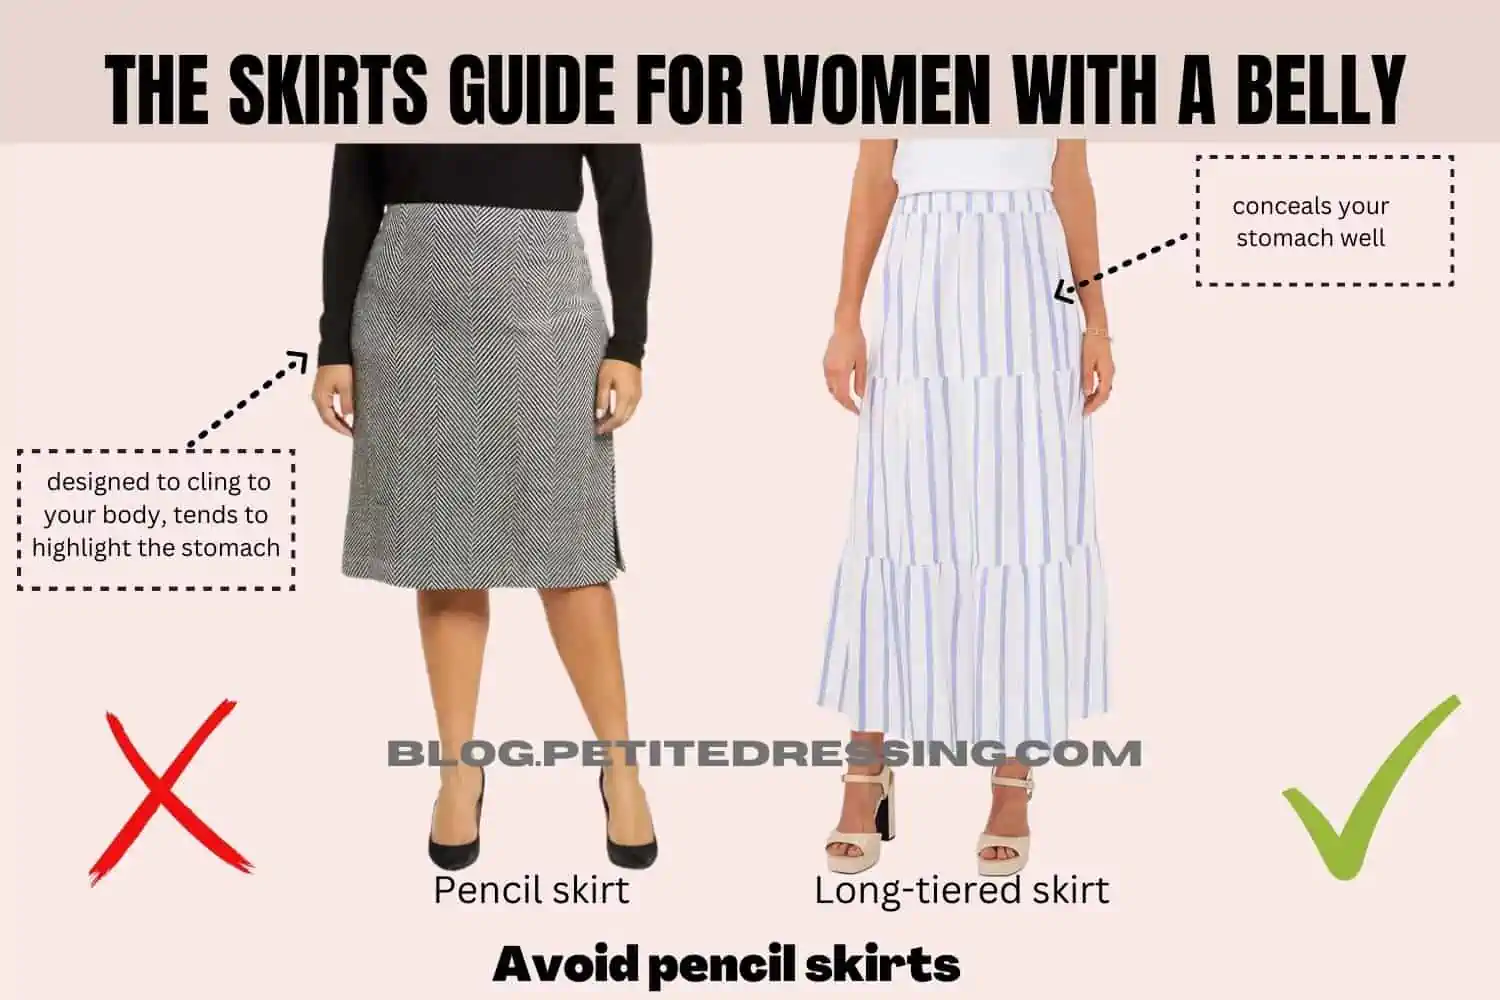 The Complete Skirt Guide for Women With a Belly